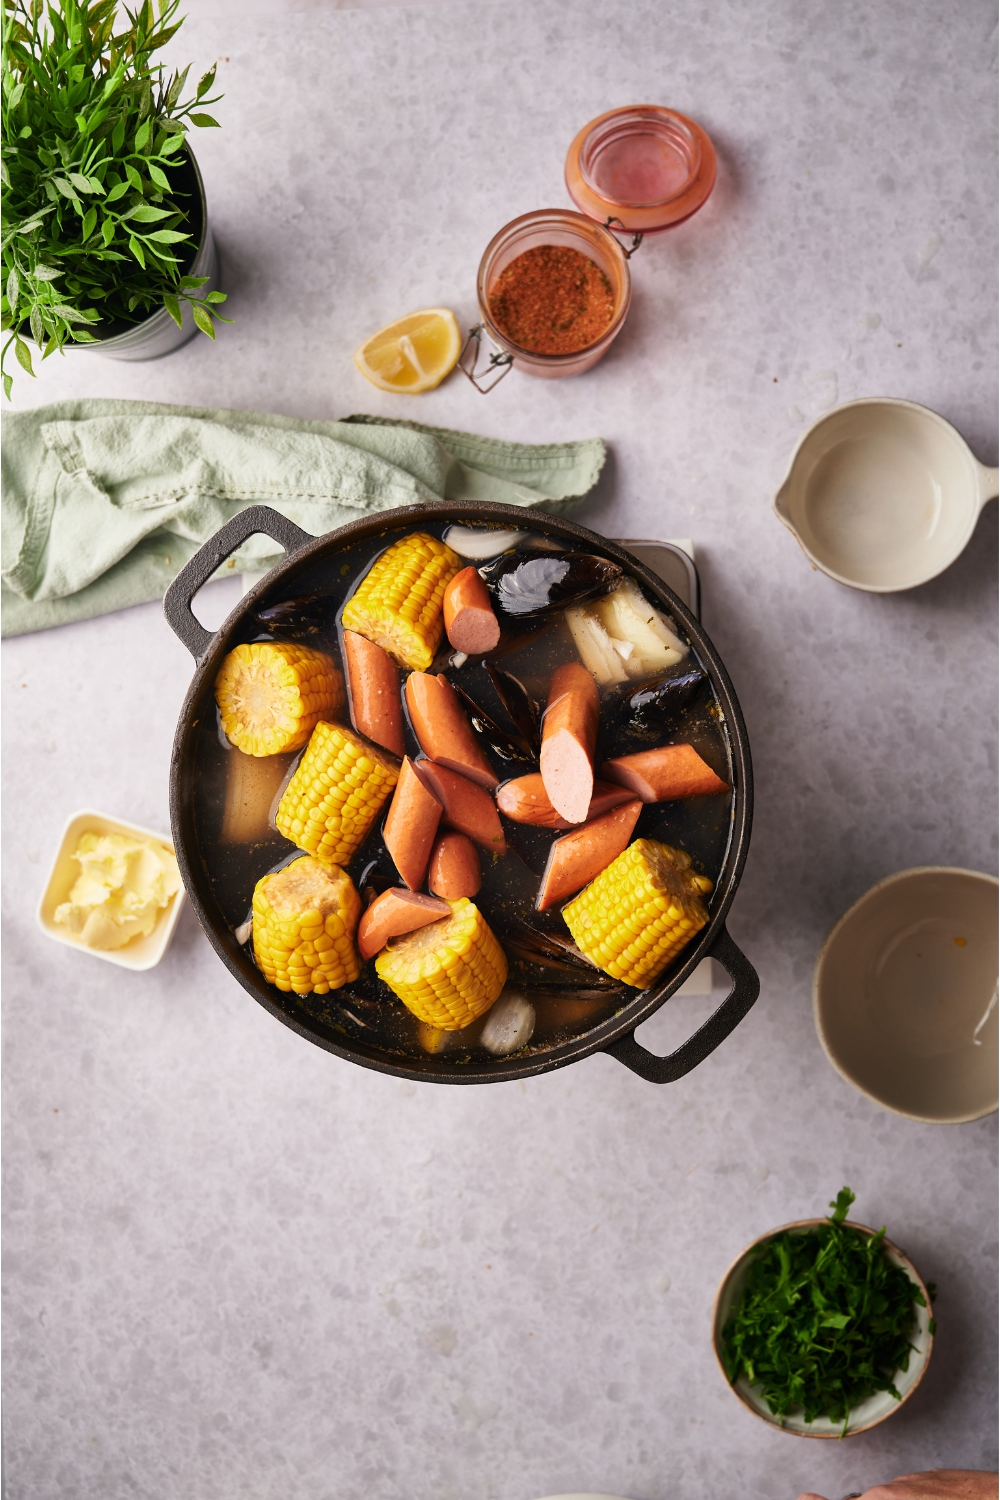 A black Dutch oven filled with sausages, clams and corn-on-the-cob pieces in a broth. Surrounding the Dutch oven is an assortment of ingredients including butter, fresh herbs, and spices.